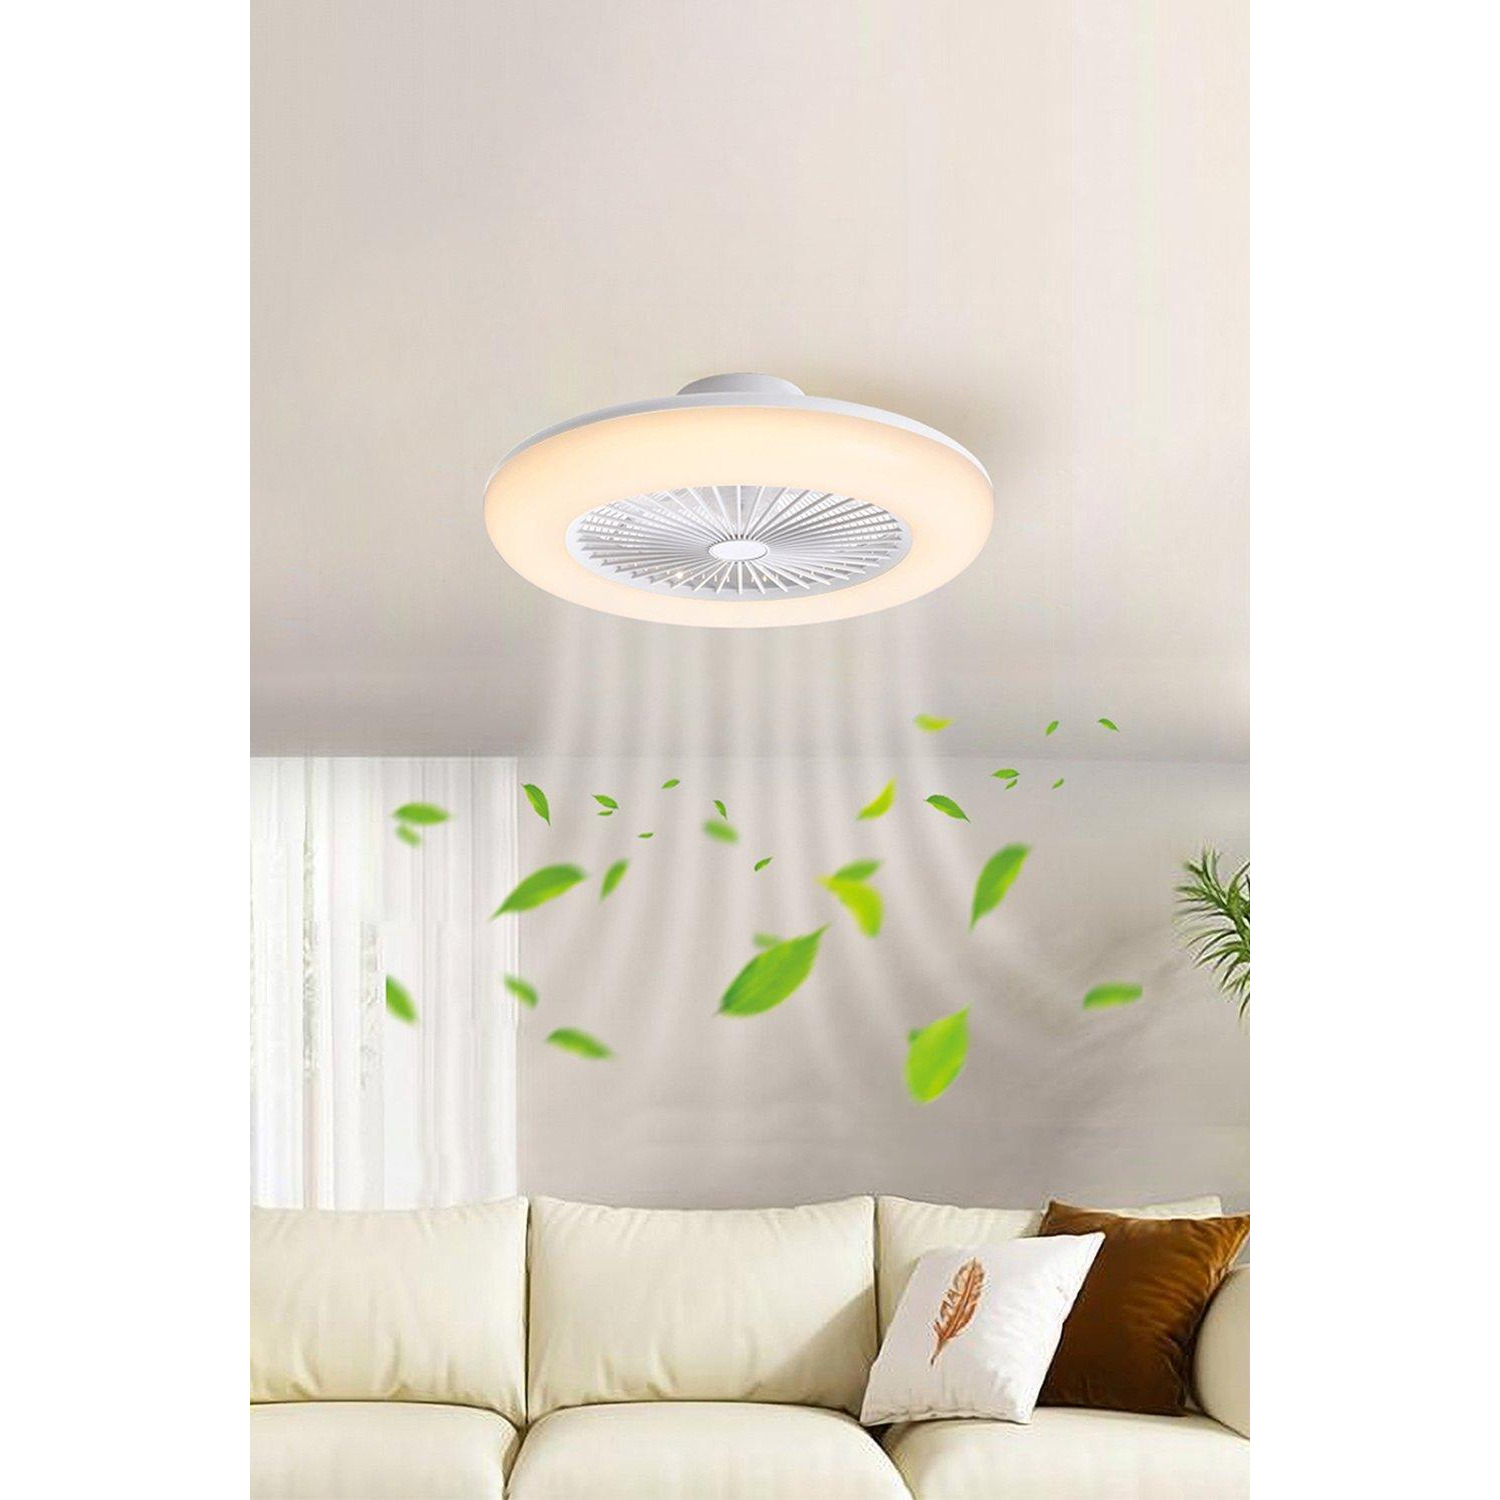 Round Acrylic Ceiling Fan with LED Light - image 1